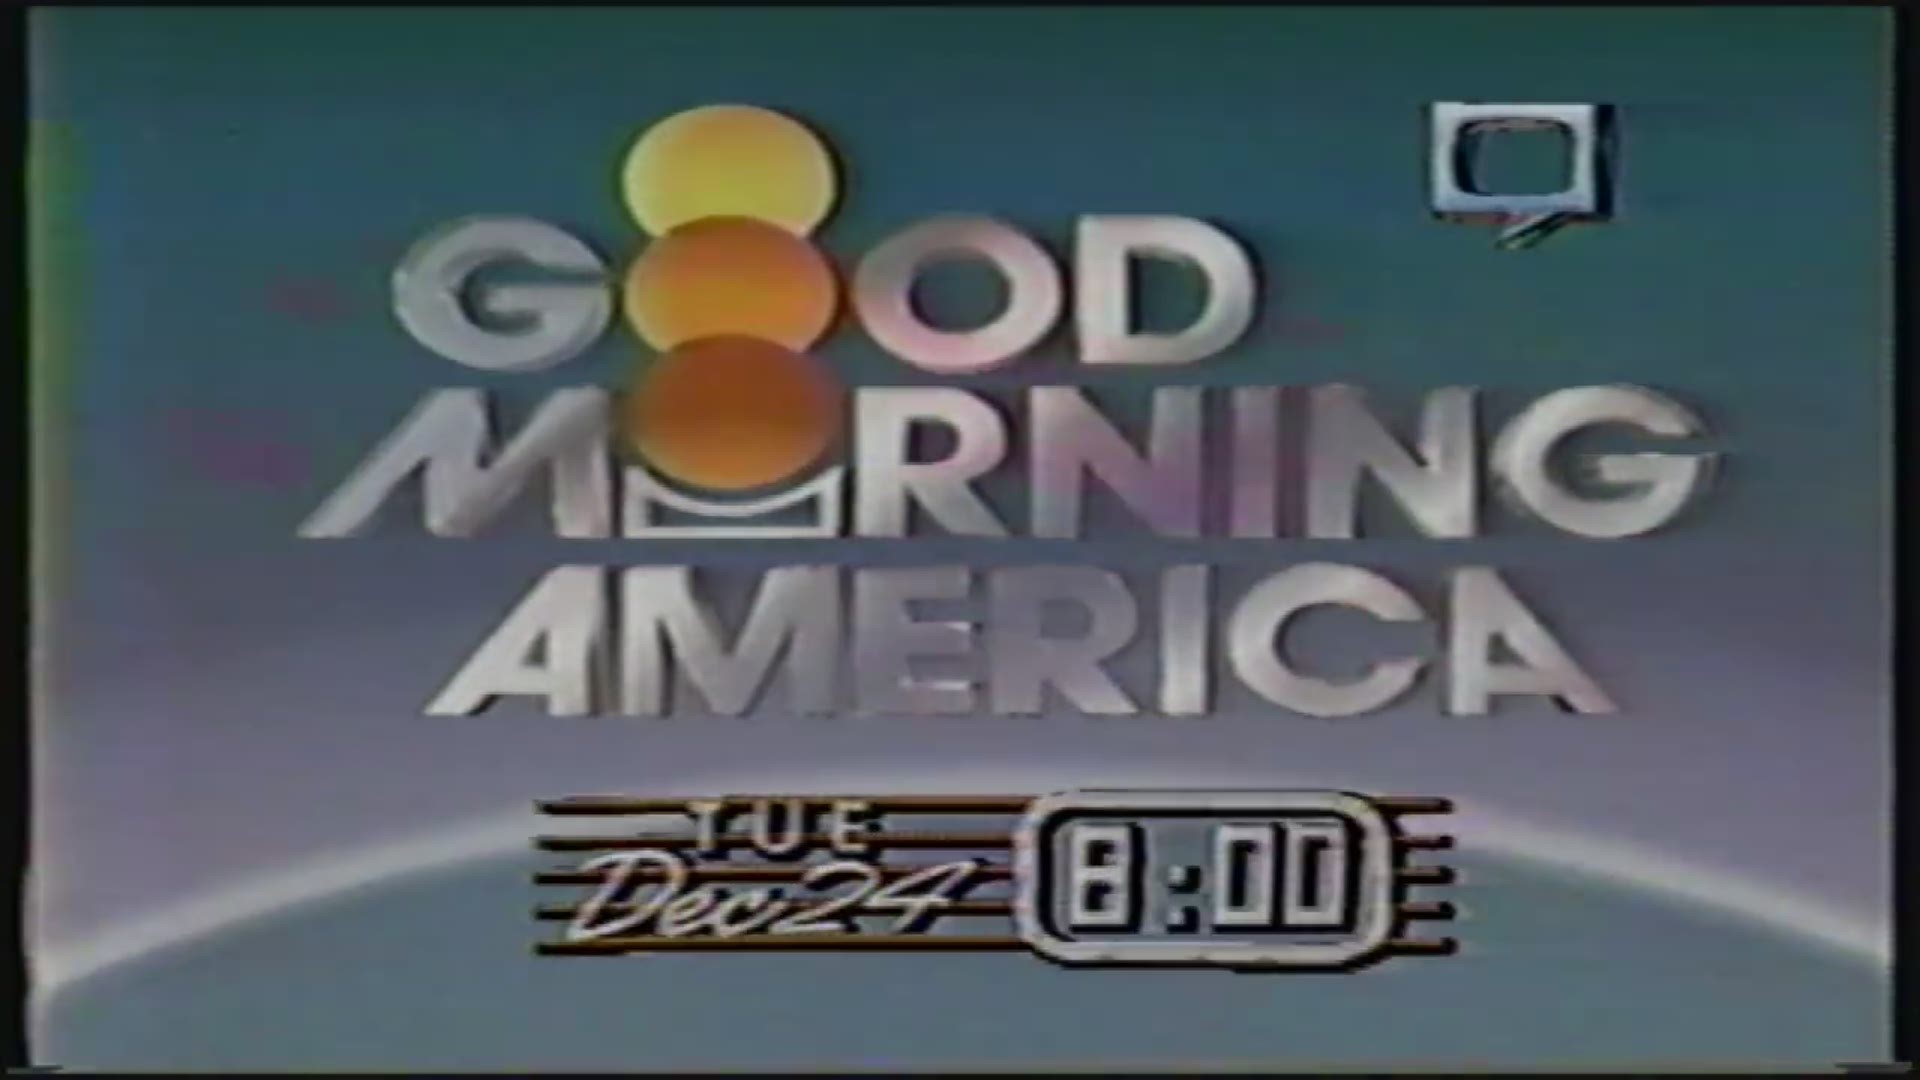 In its inaugural year (1985), the Mona Shores Singing Christmas Tree made ABC's Good Morning America.